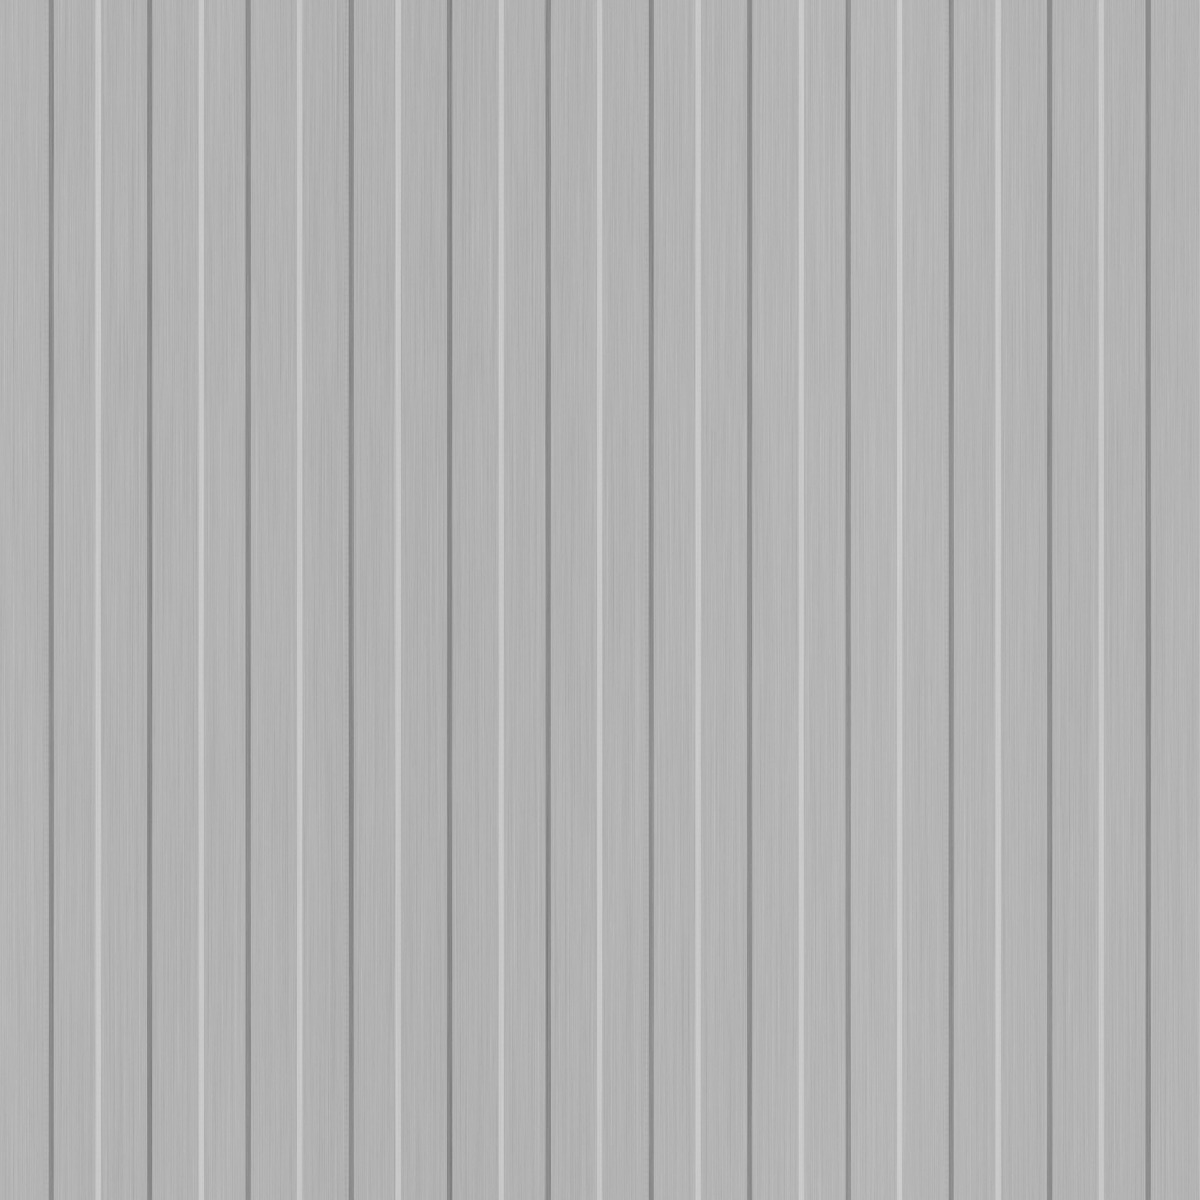 A seamless metal texture with stainless steel sheets arranged in a None pattern